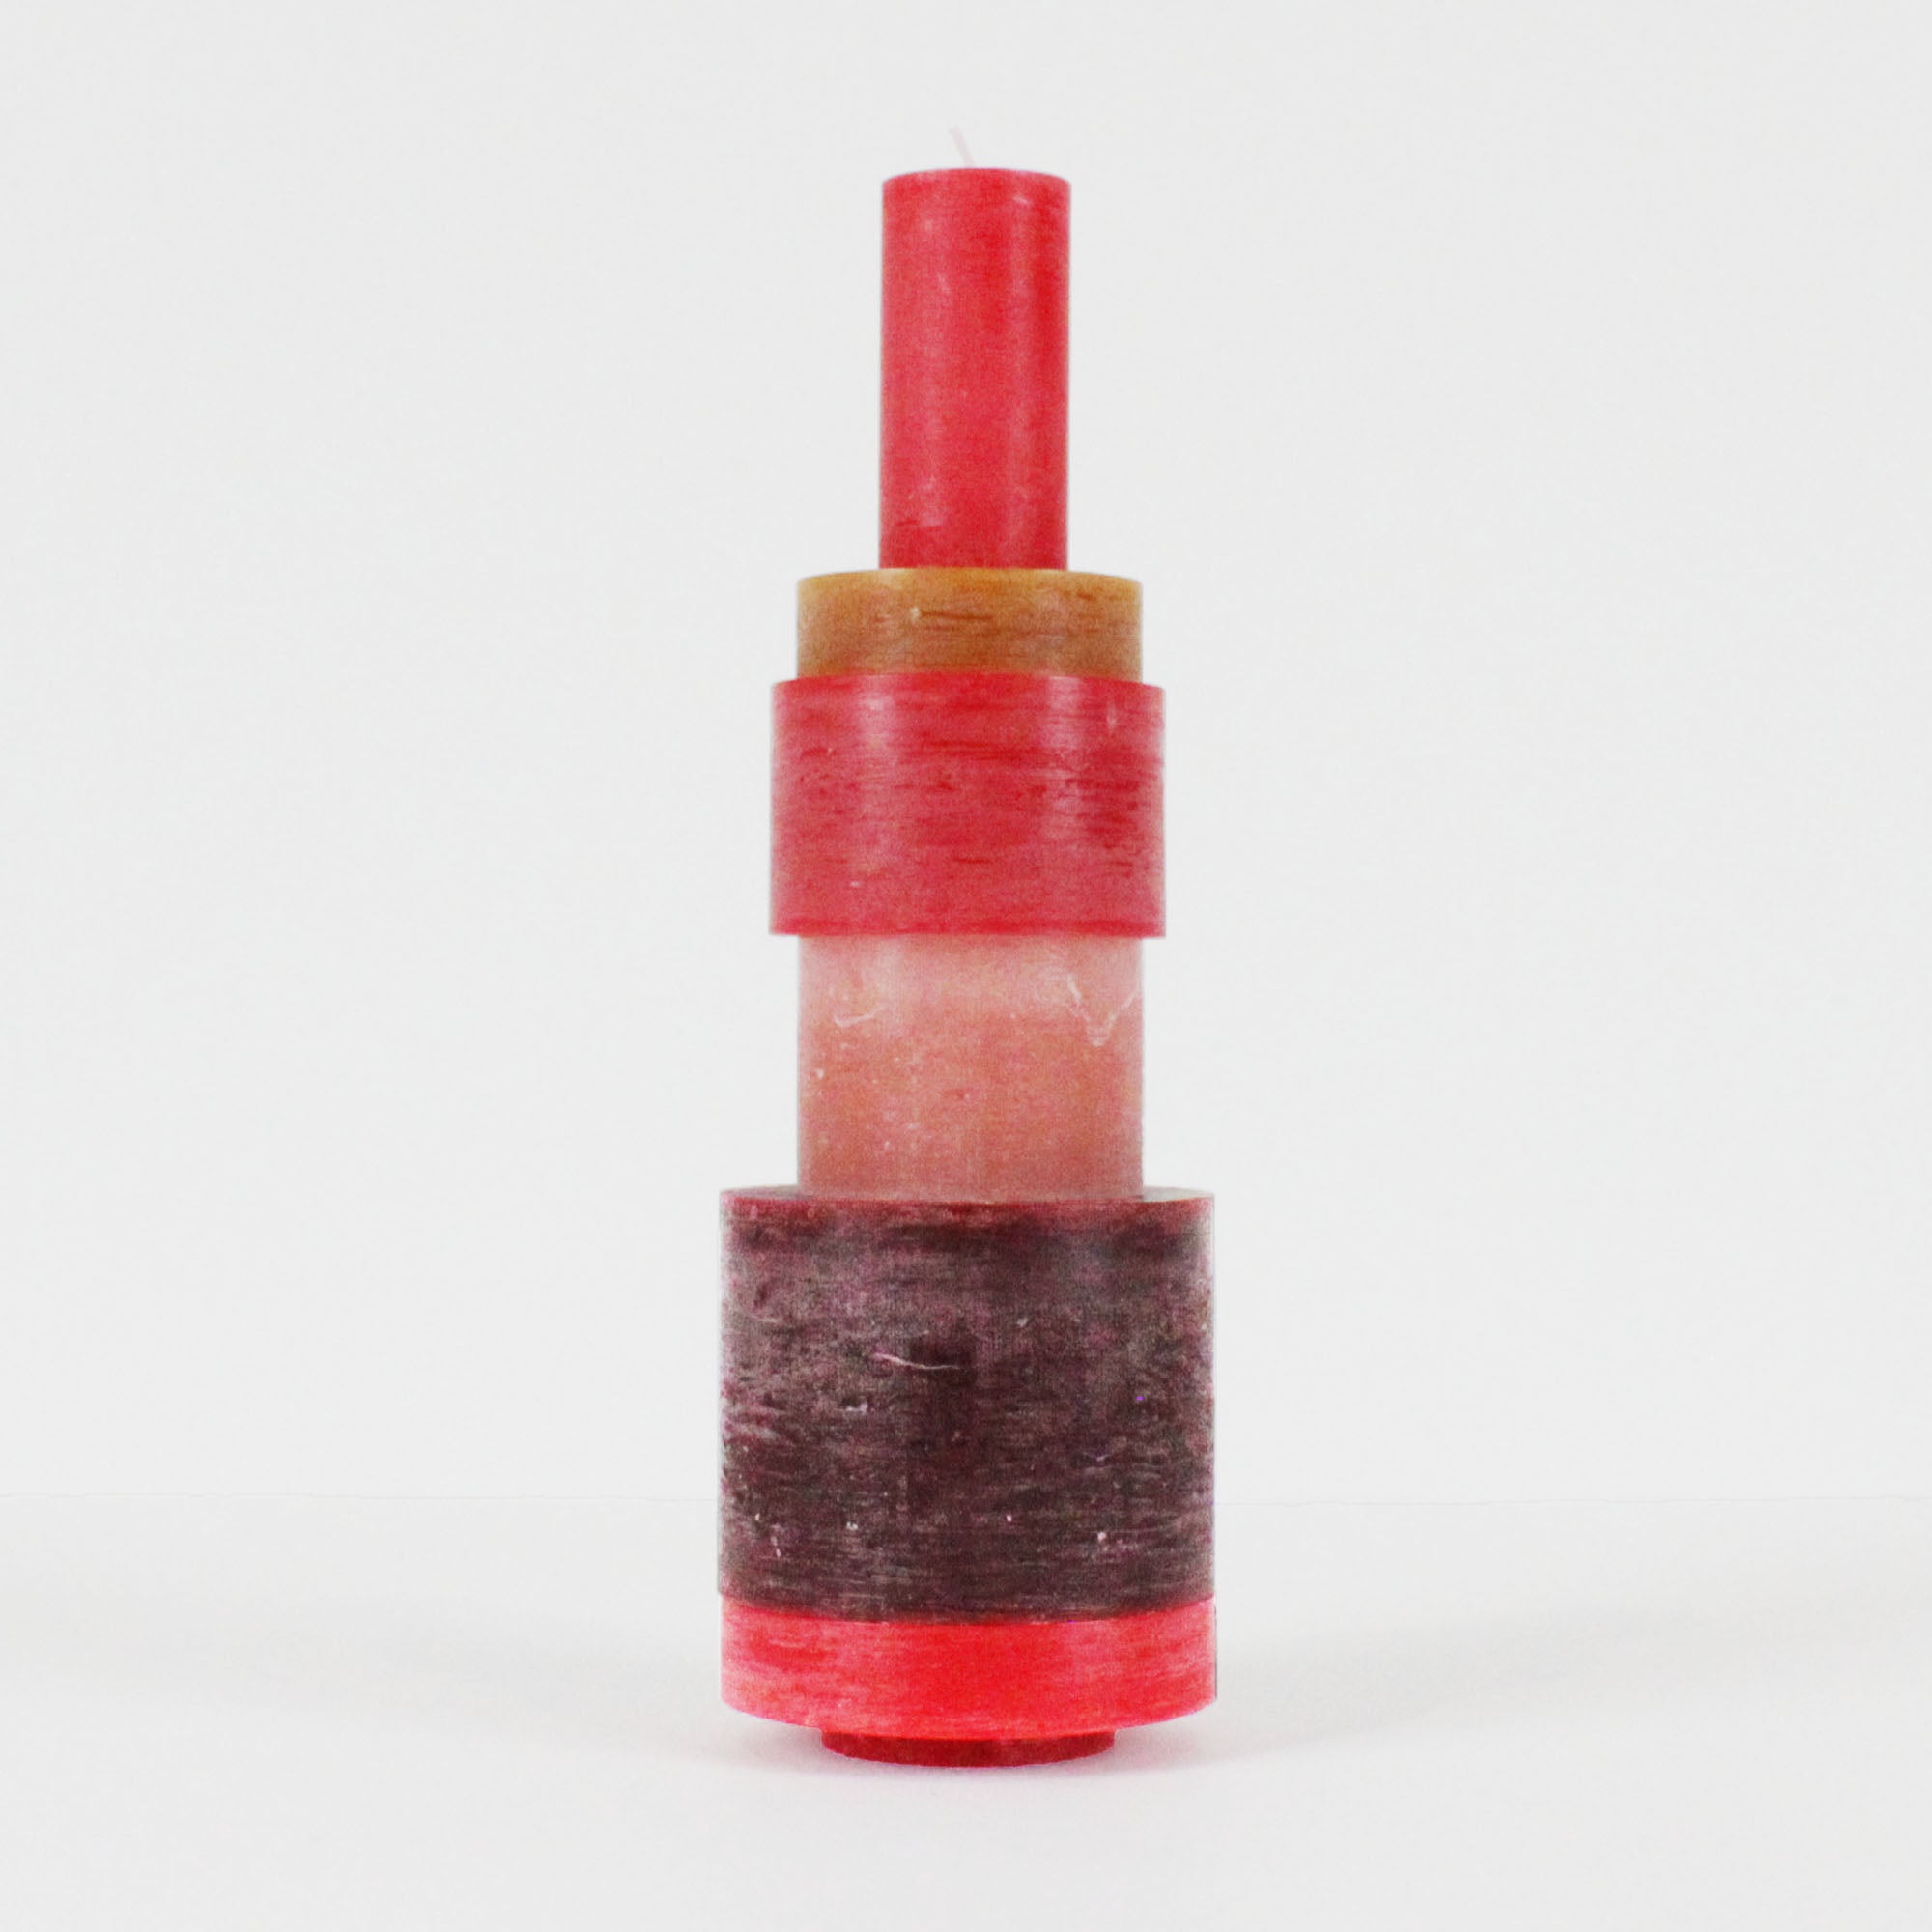 Candle Stack 06 (Red)